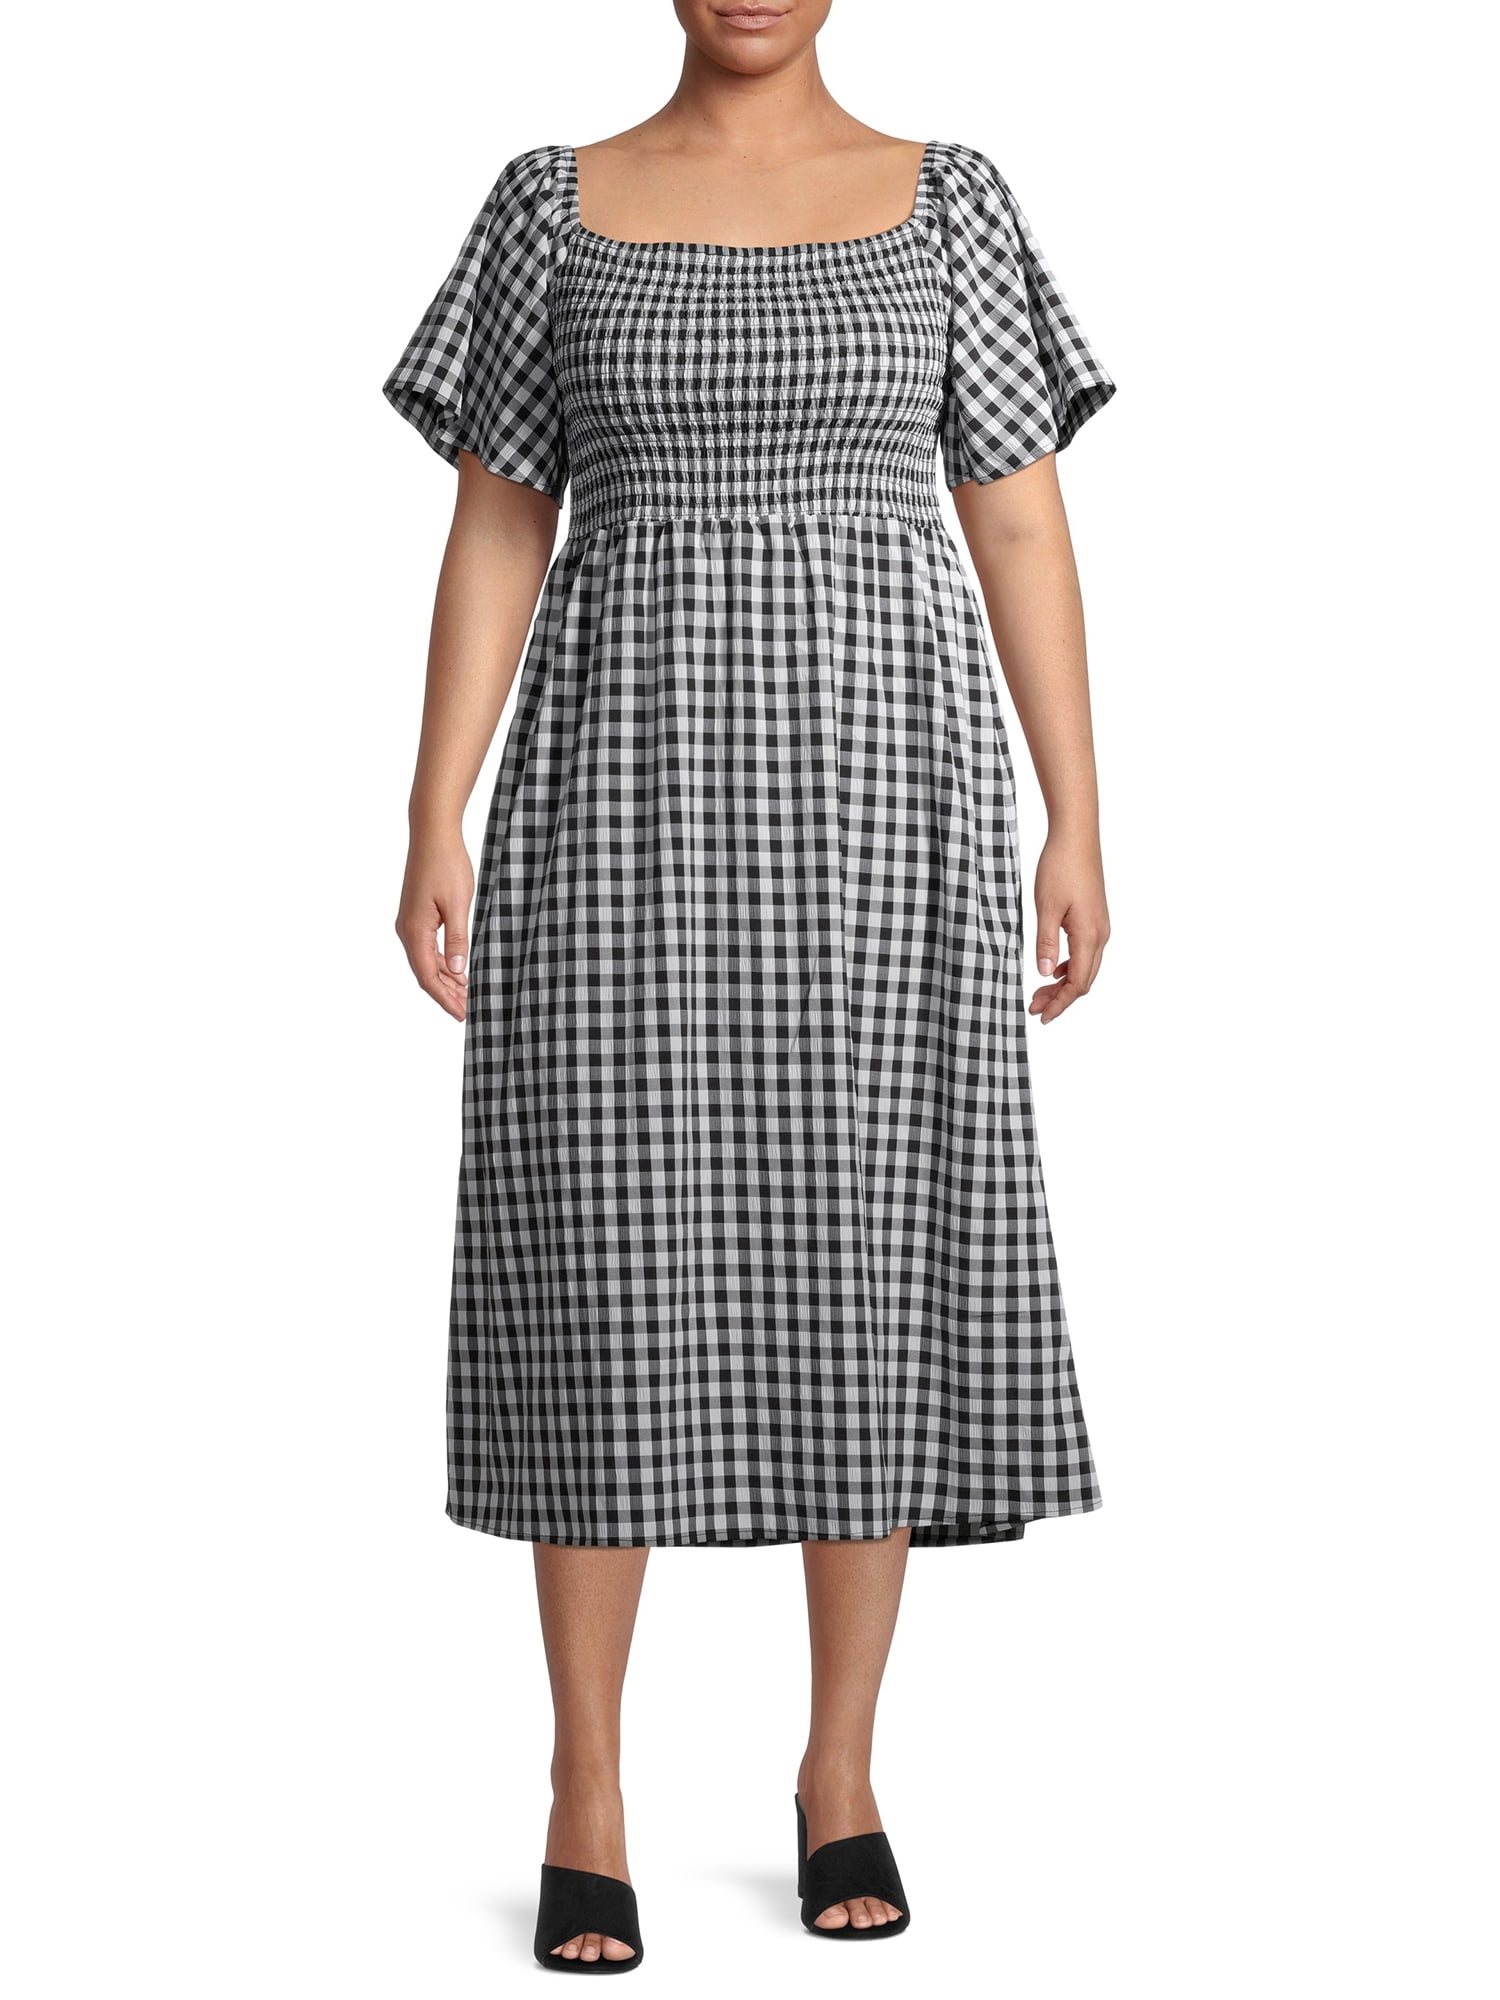 Gray by Grayson Social Women's Plus Size Smocked Square Neck Gingham ...